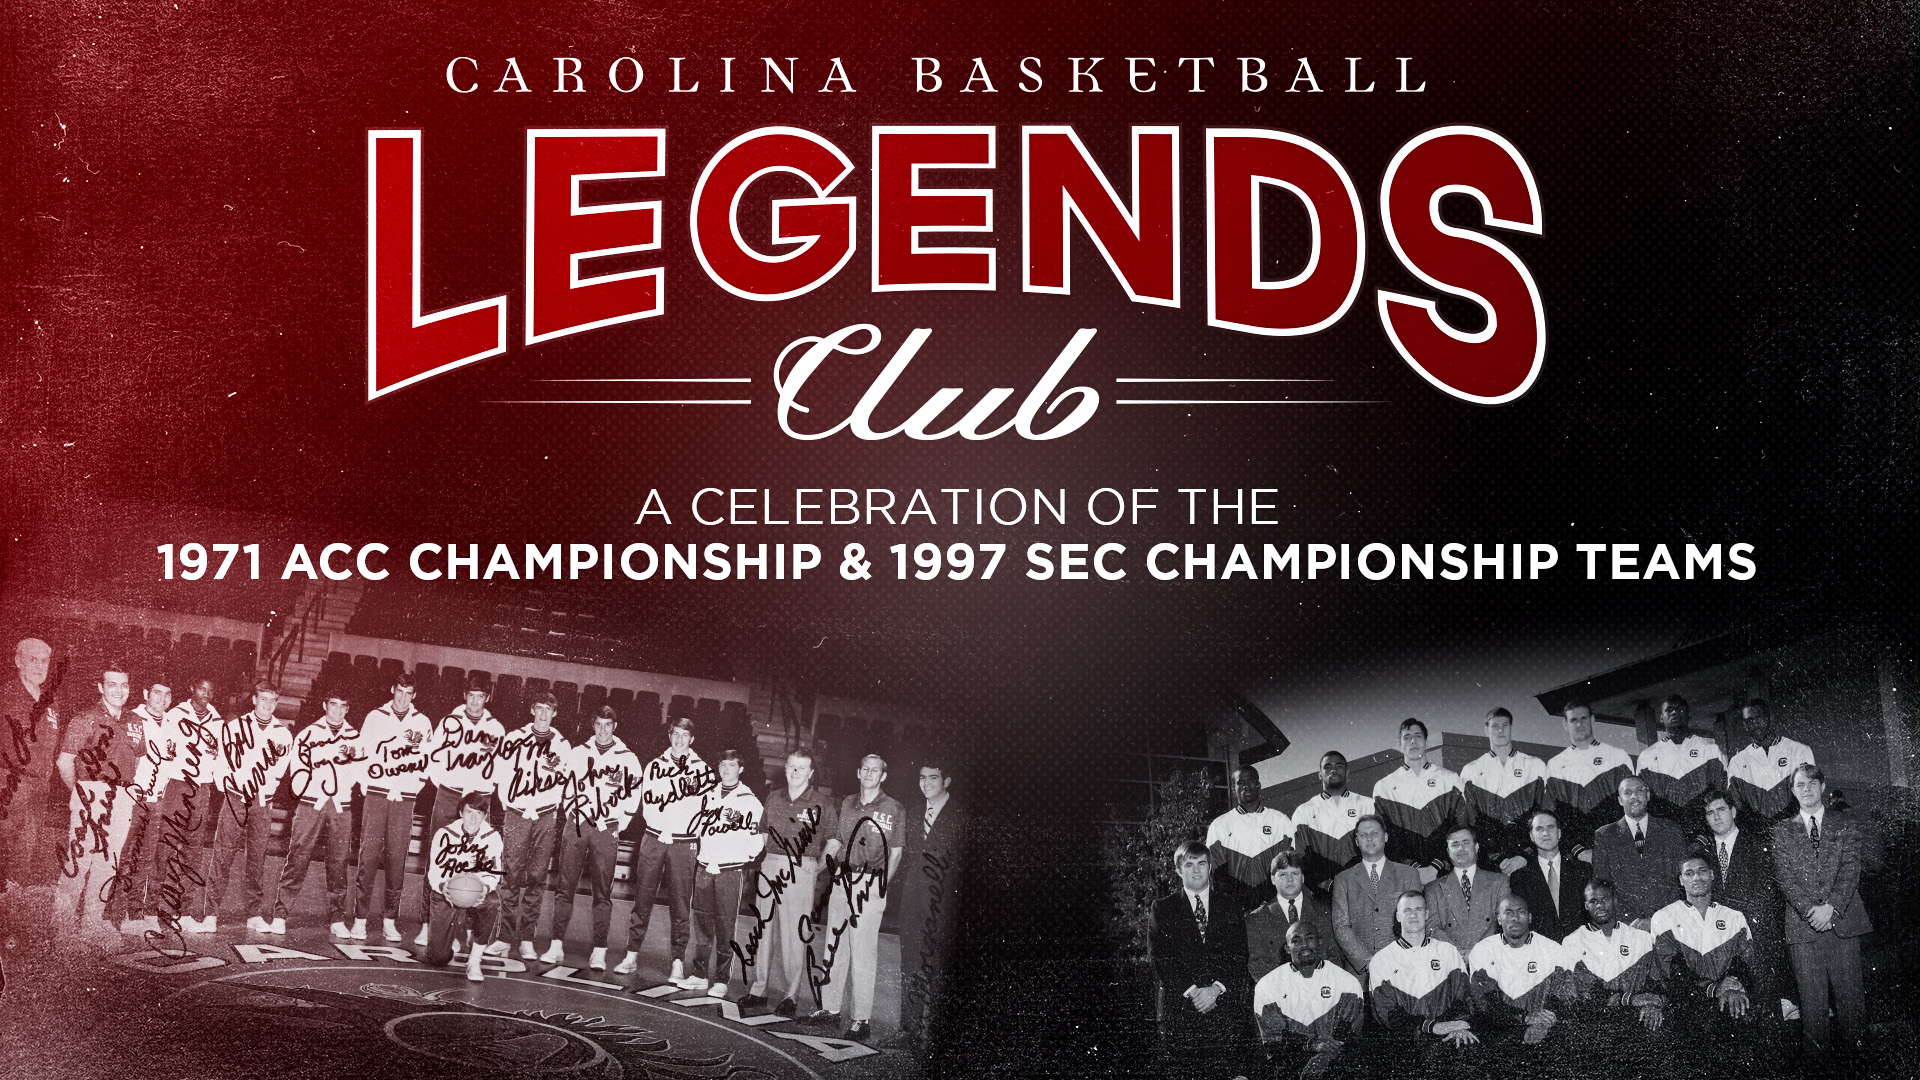 Gamecocks Set to Honor Legends Against LSU on Feb. 19